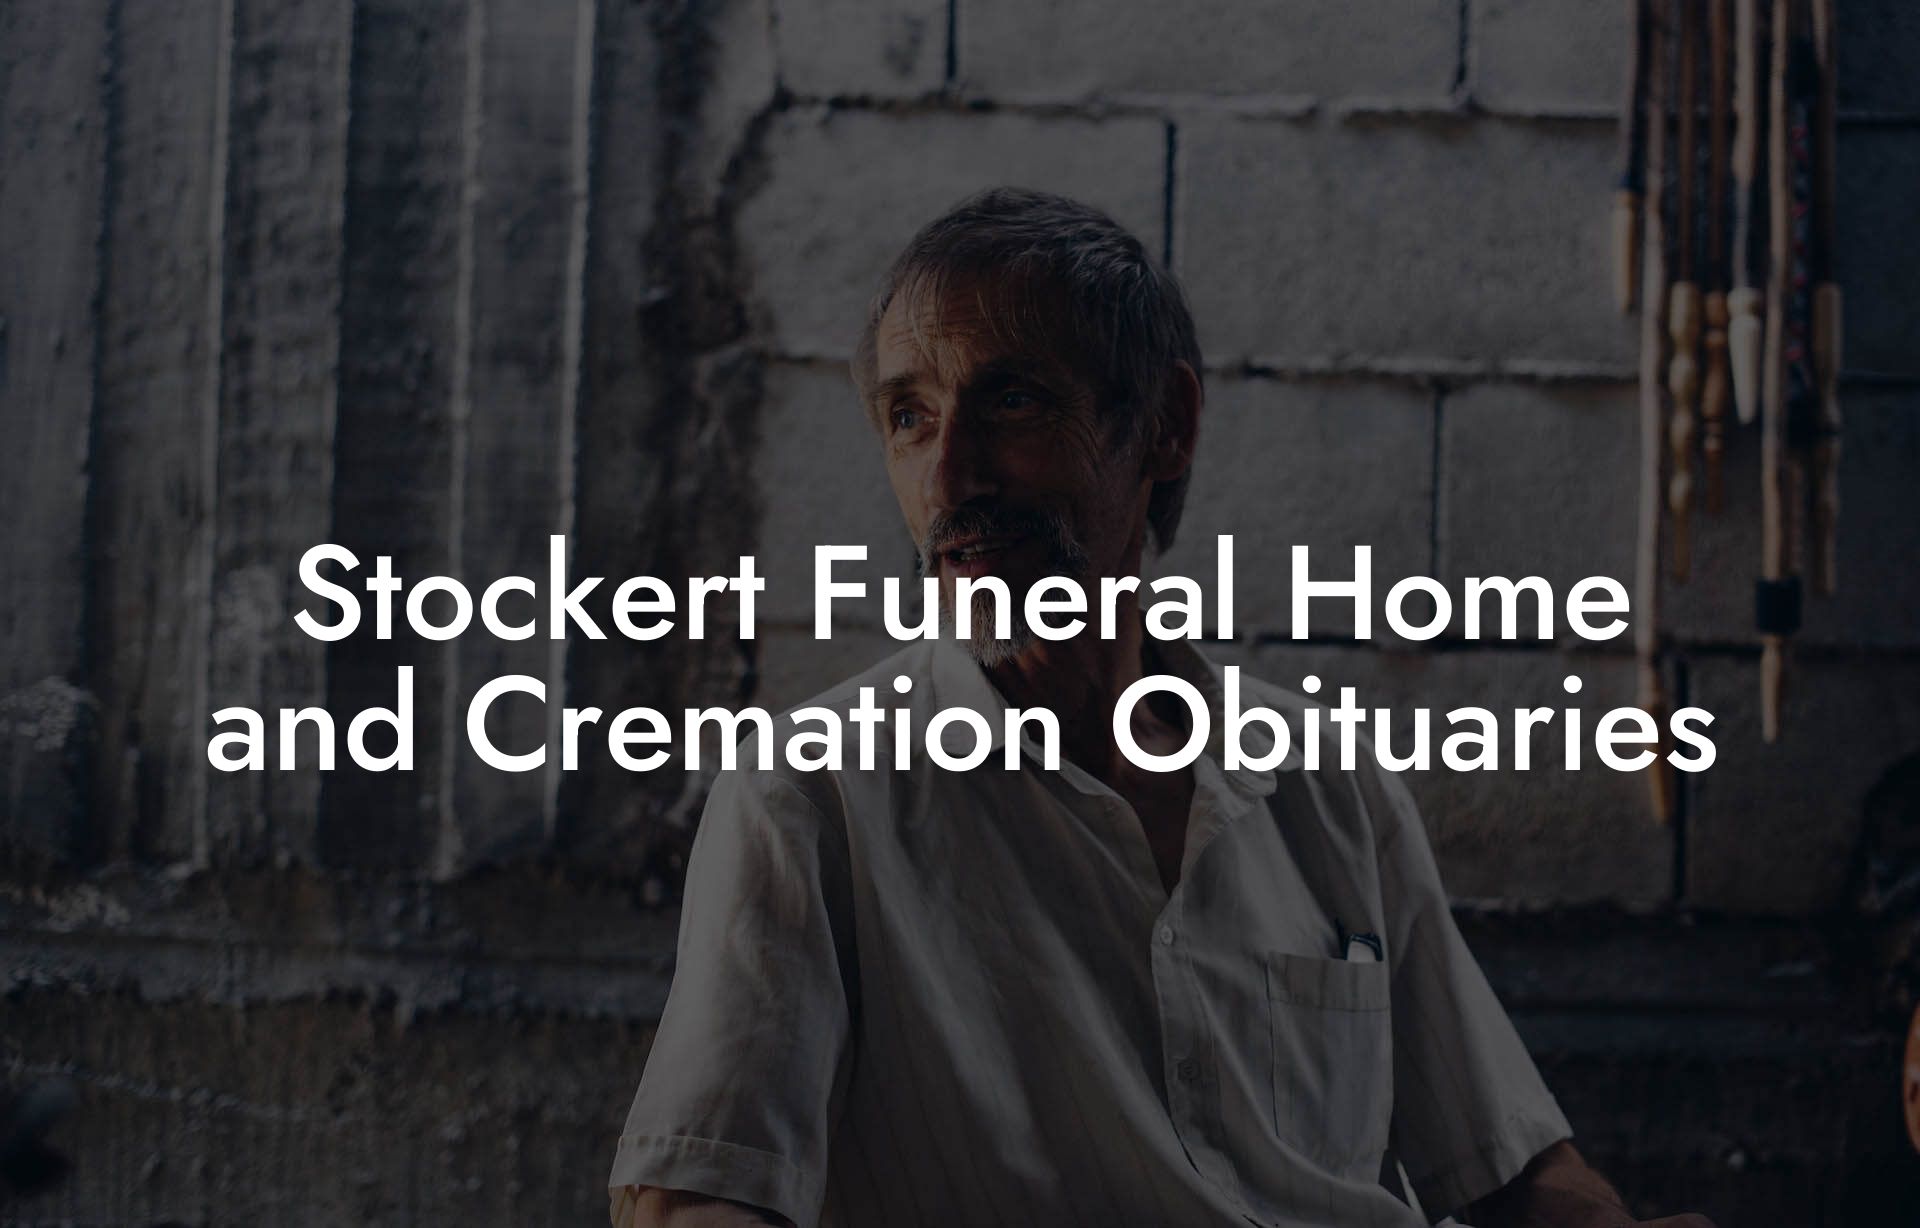 Stockert Funeral Home and Cremation Obituaries